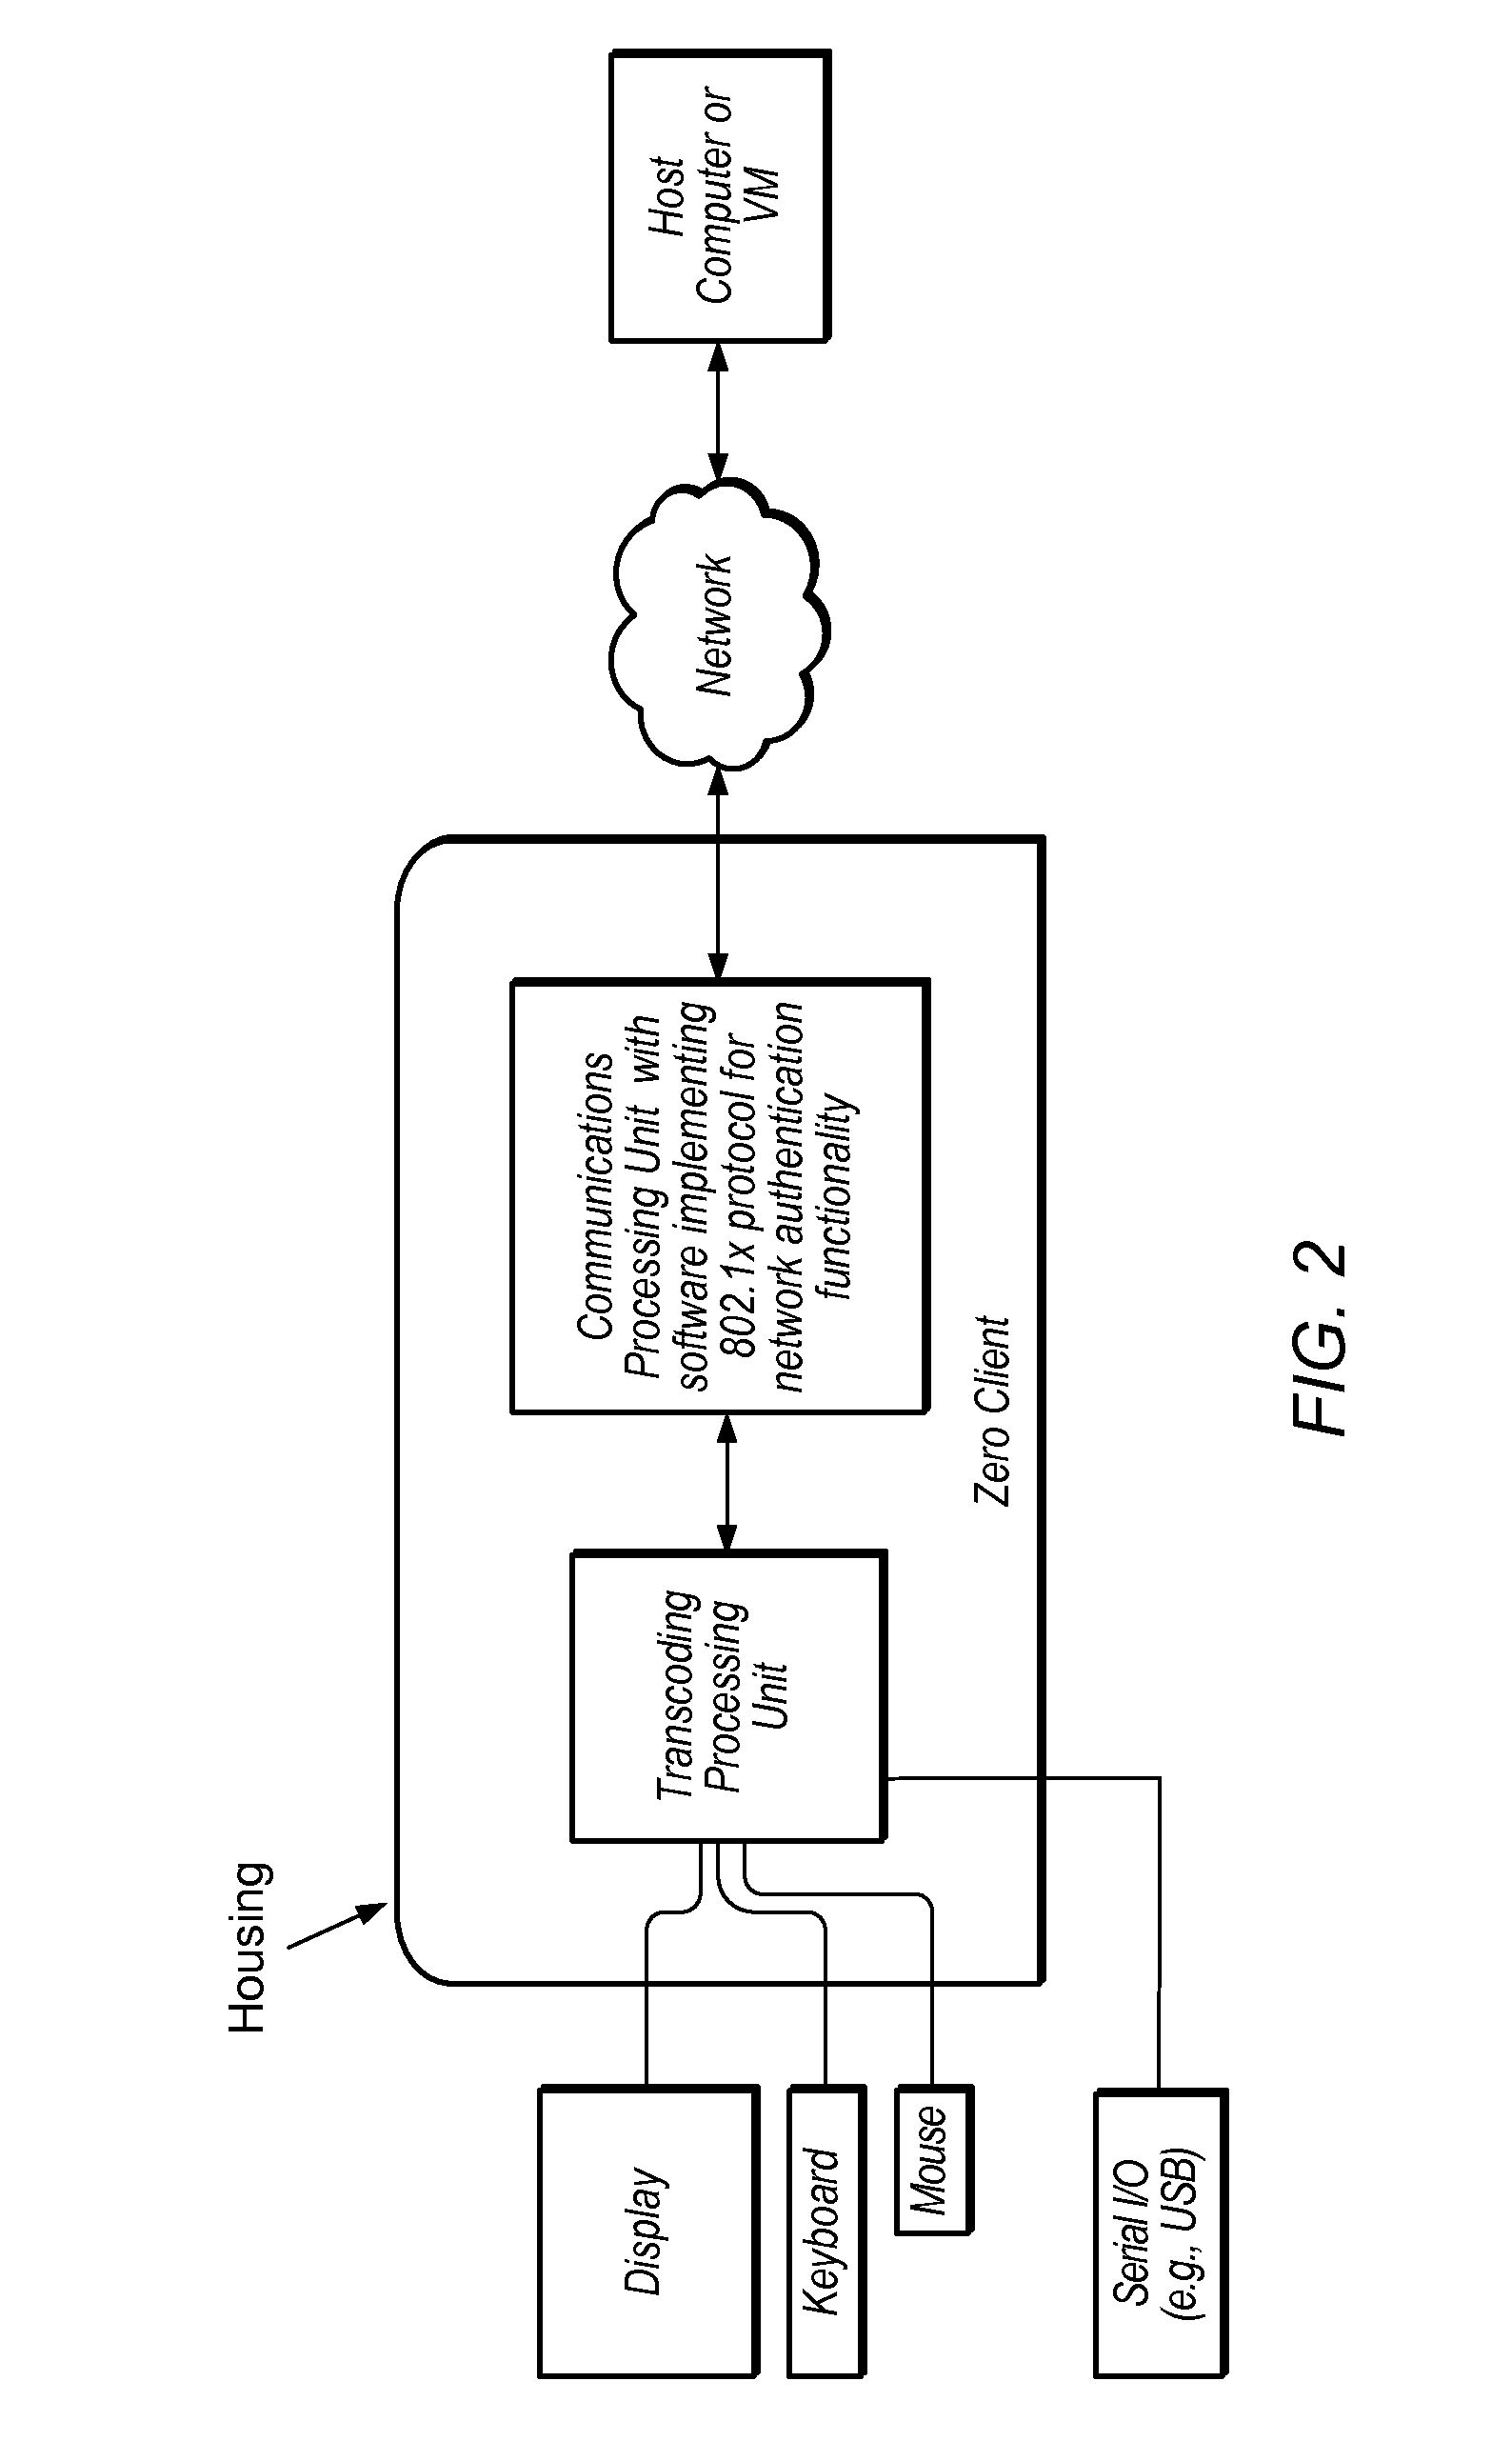 Zero Client Device with Integrated Secure KVM Switching Capability